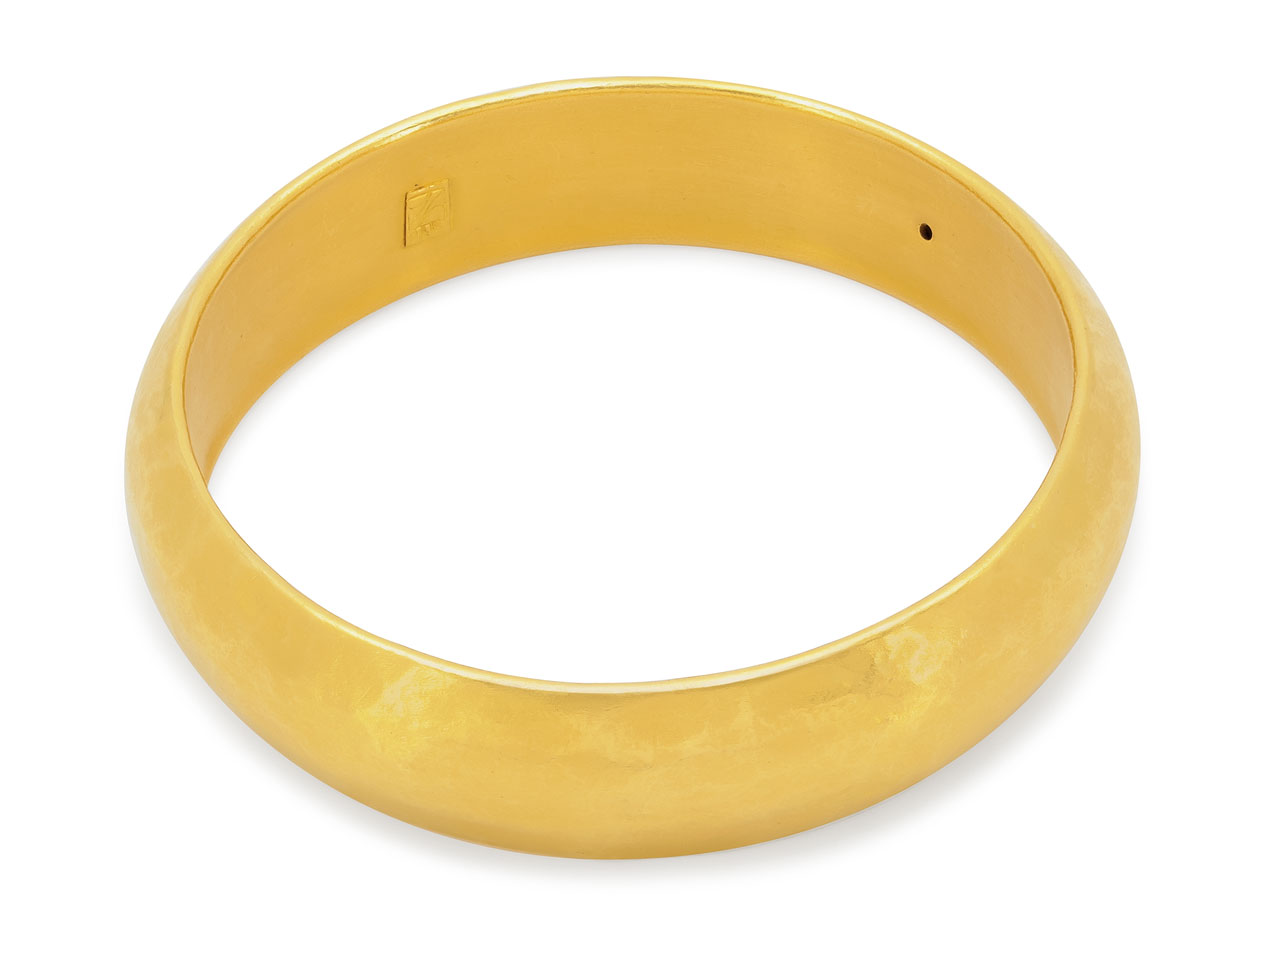 Wide Bangle Bracelet in 24K Gold, by Yossi Harari